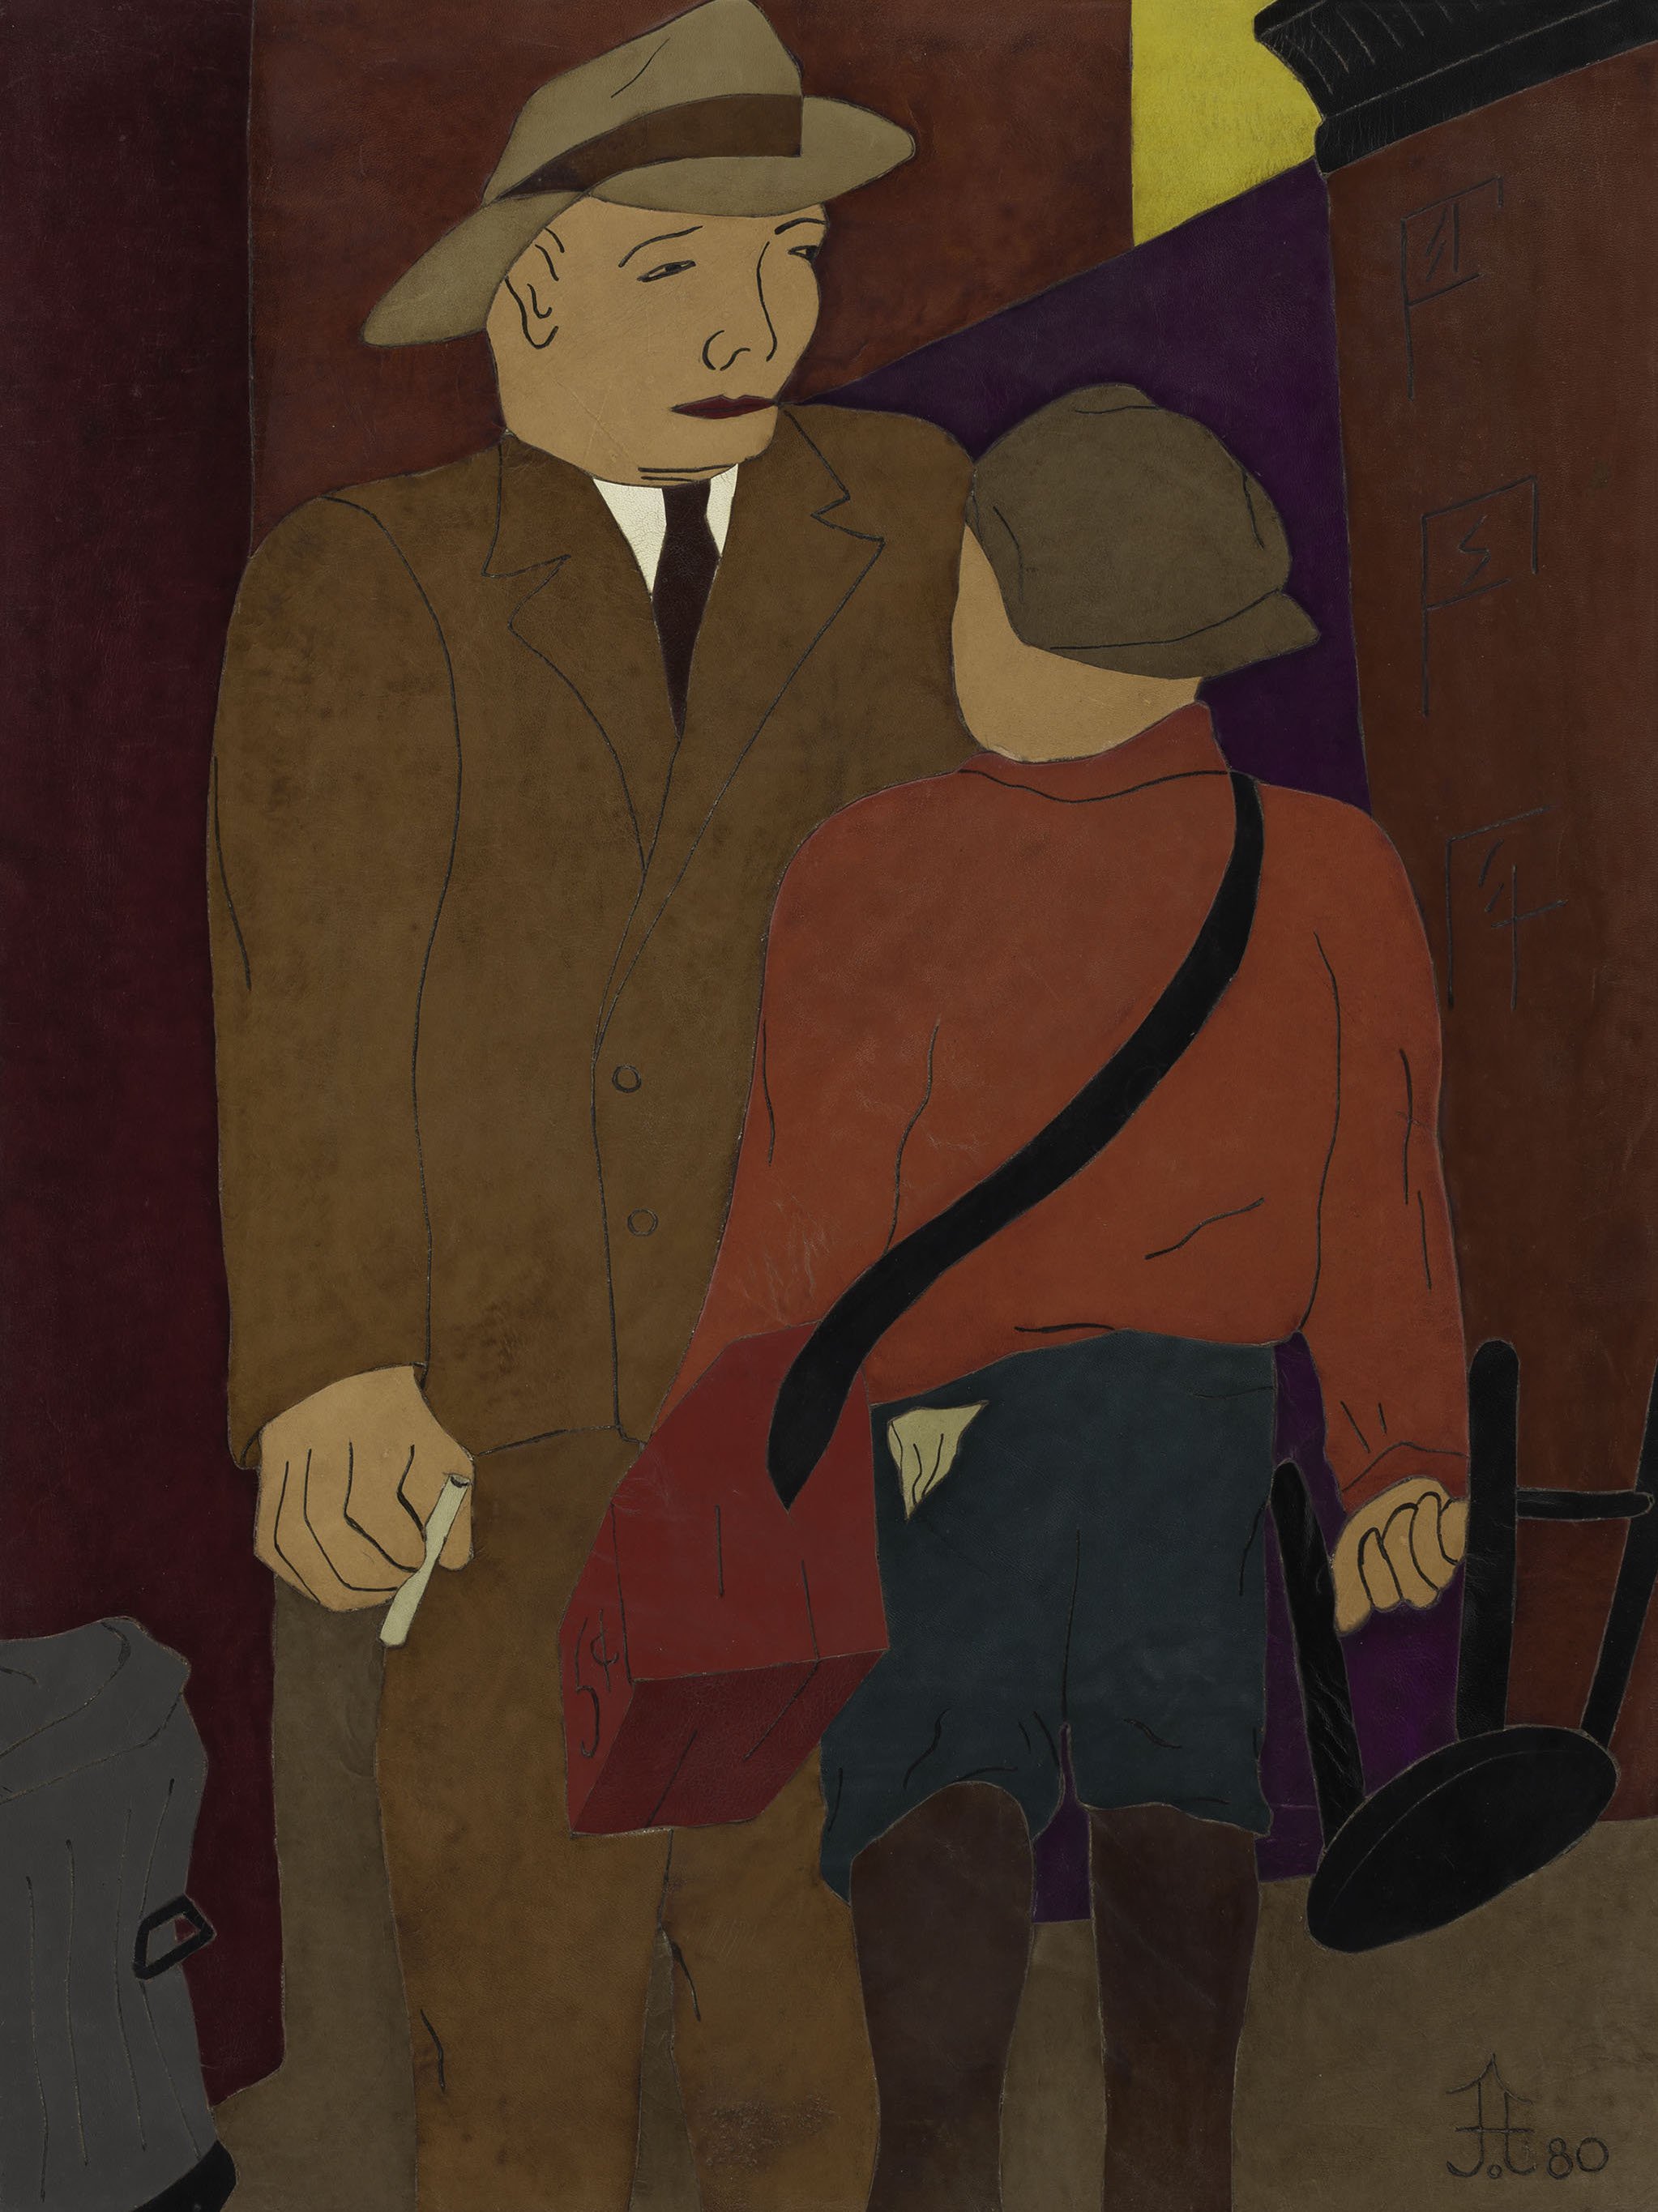 Street scene of a shoe shine boy standing before a businessman in browns, reds, and blue.